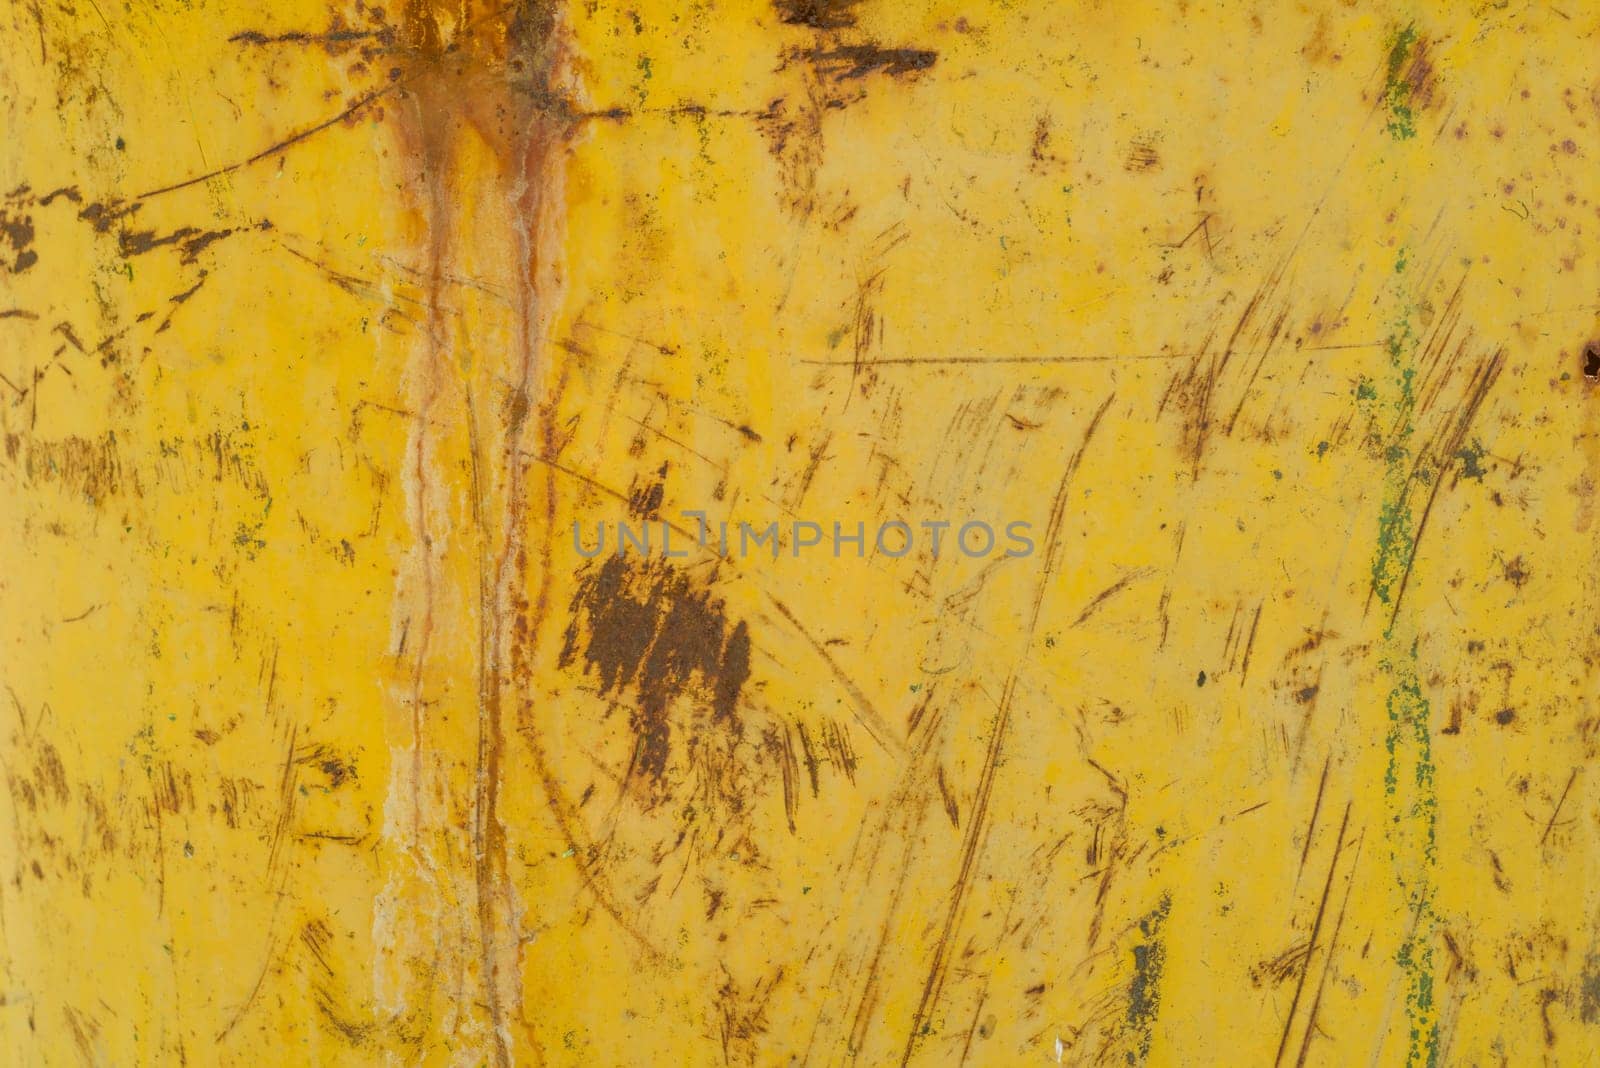 Abstract corroded rusty metal background, texture yellow brown